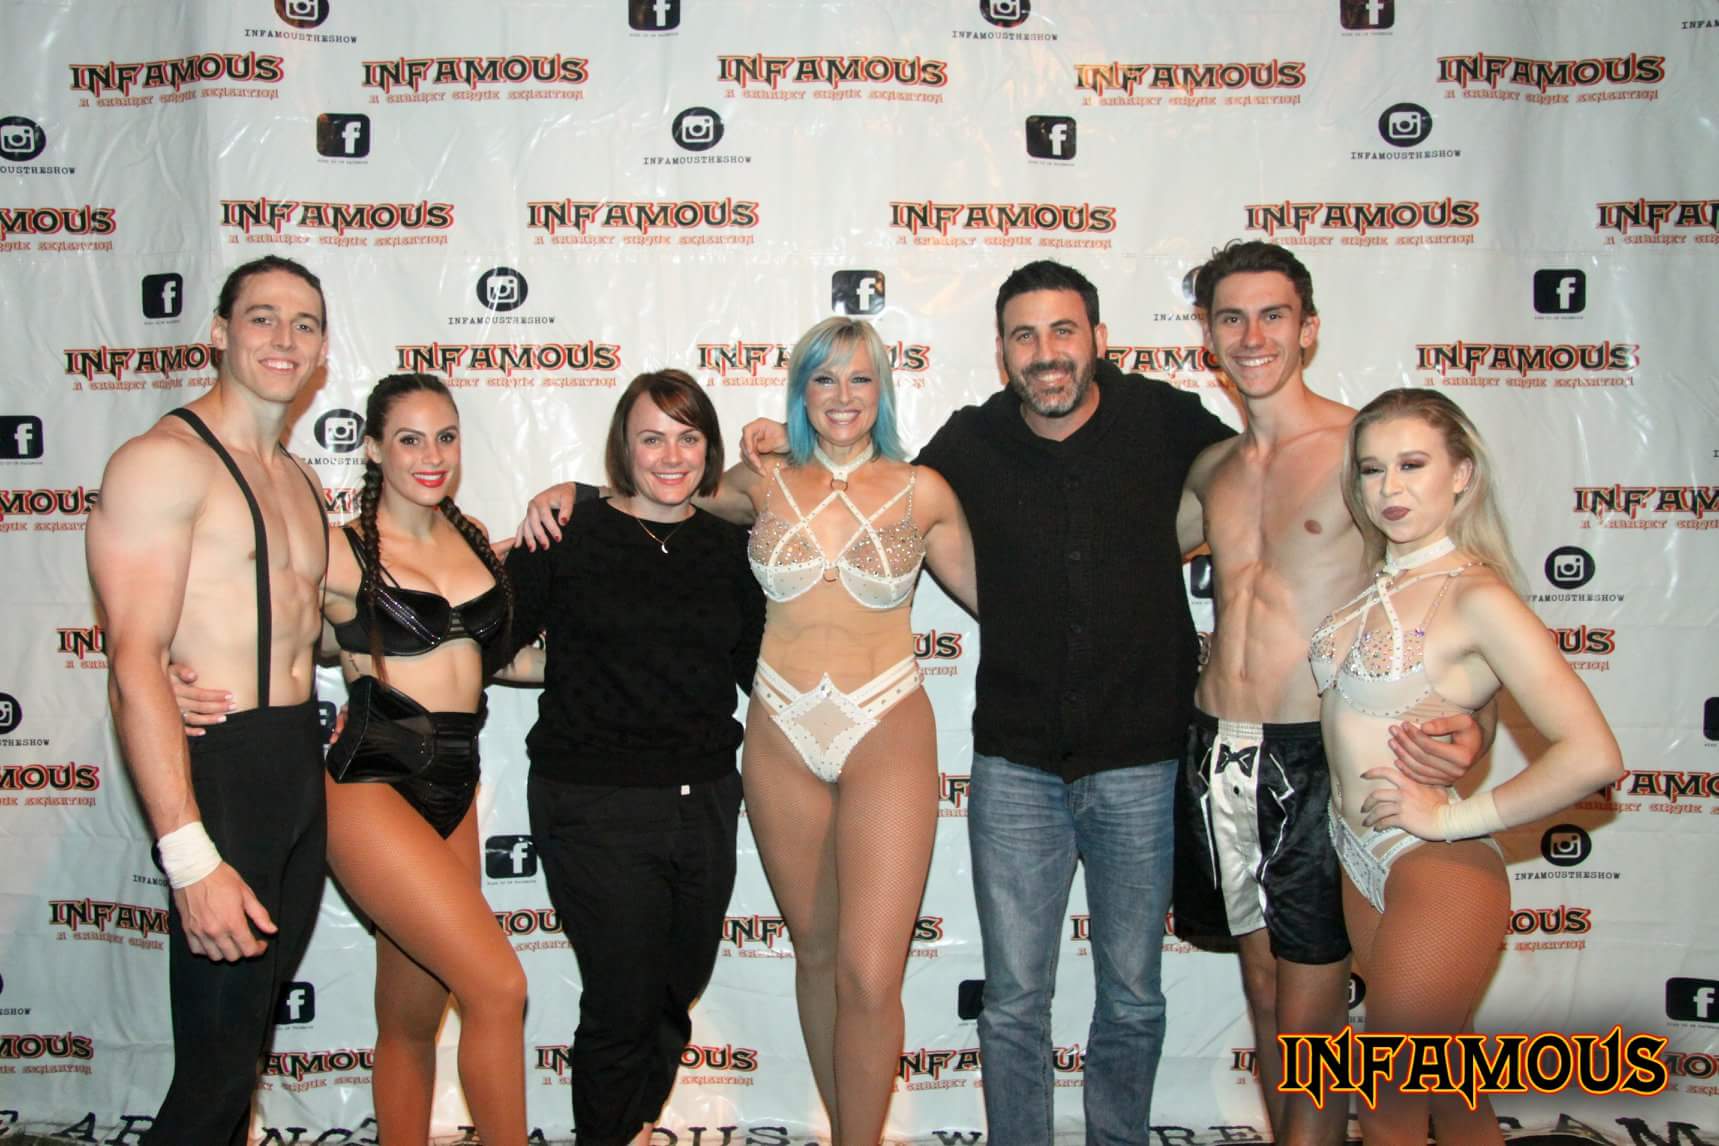 Michael Doig & Louise Connolly at Infamous Circus